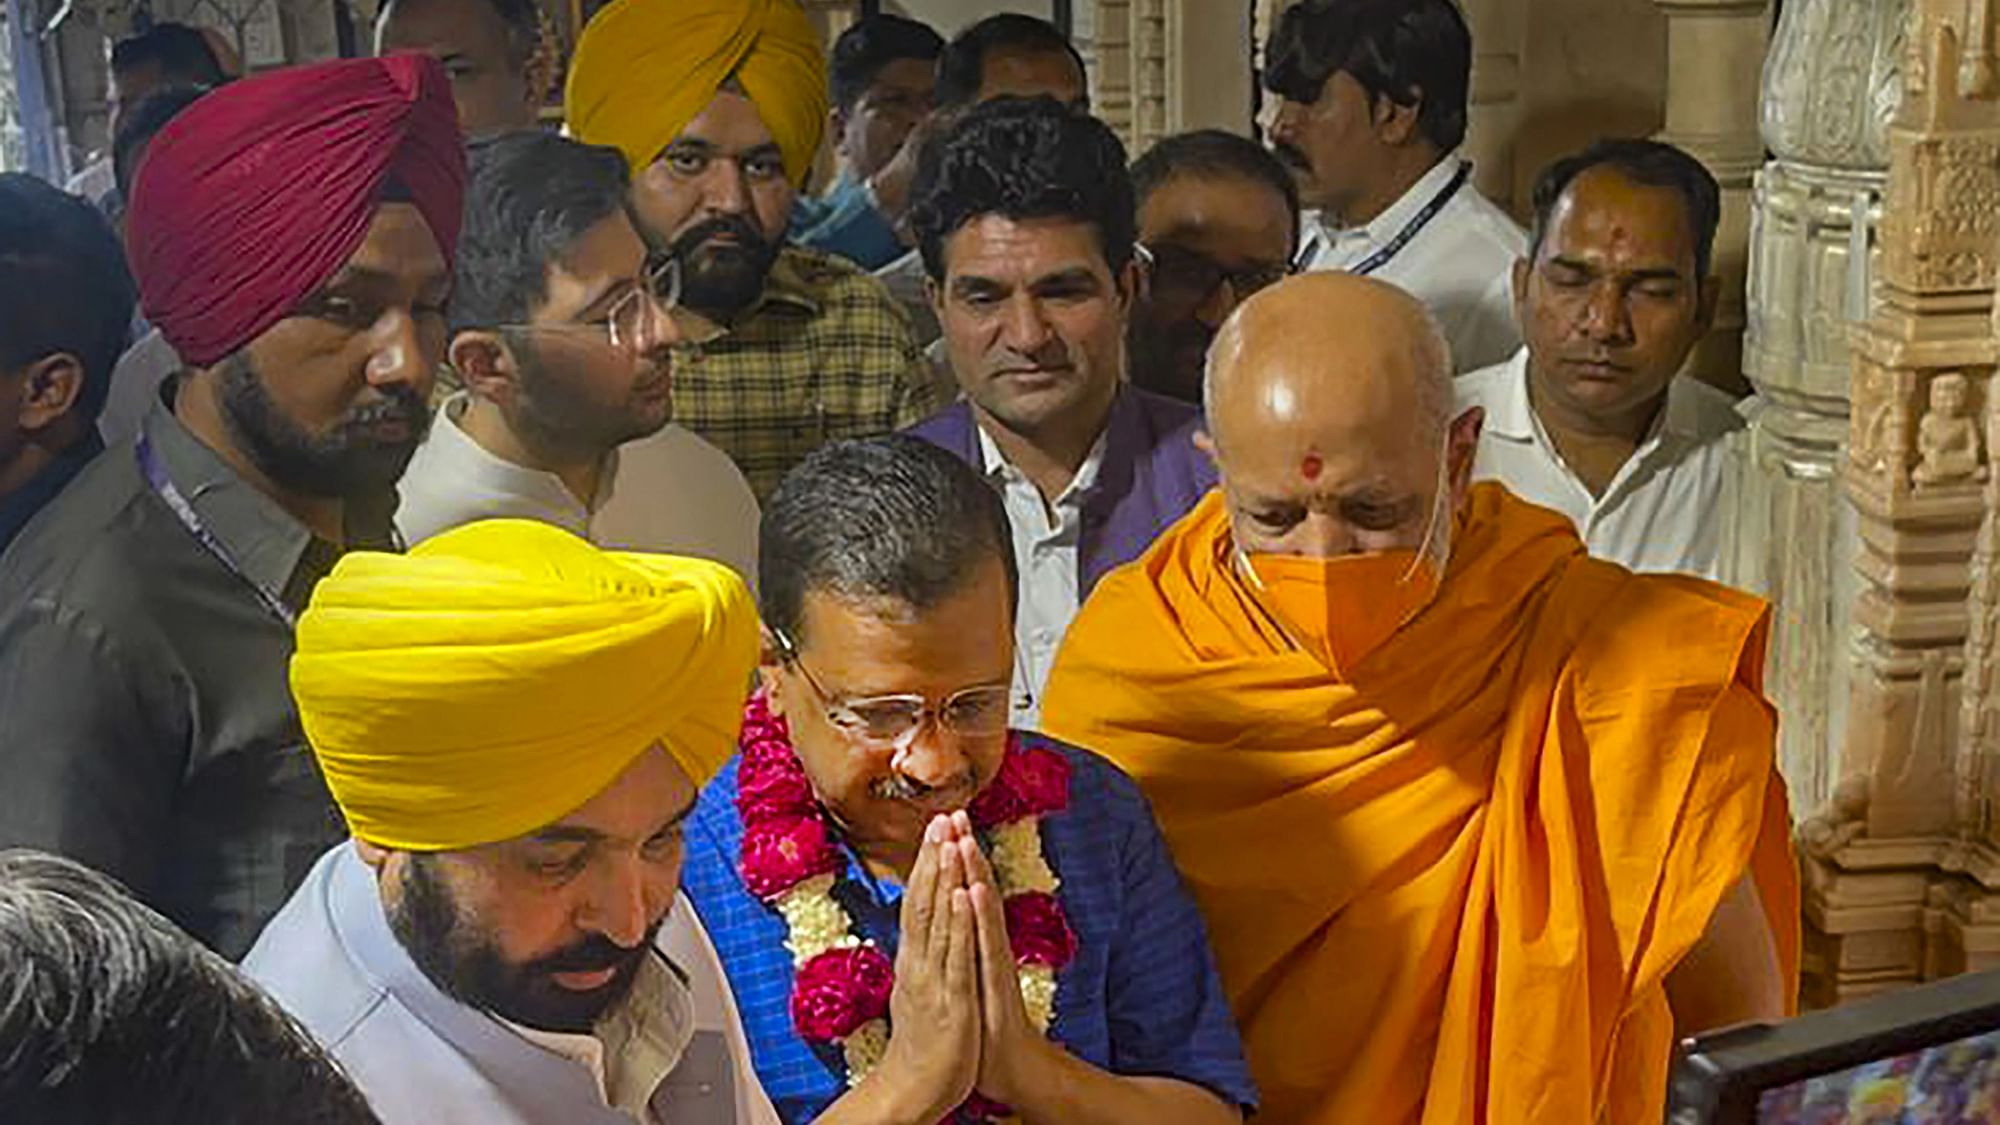 <div class="paragraphs"><p>Arvid Kejriwal&nbsp;<a href="https://www.thequint.com/gujarat-elections/gujarat-elections-2022-arvind-kejriwal-bhagwant-mann-ahmedabad">concluded his two-day visit</a> with a prayer offering at the BAPS Swaminarayan Sanstha temple in Ahmedabad, where he was accompanied by Punjab Chief Minister Bhagwant Mann, and Gujarat AAP leaders, including Isudan Gadhvi and Gopal Italia.</p></div>